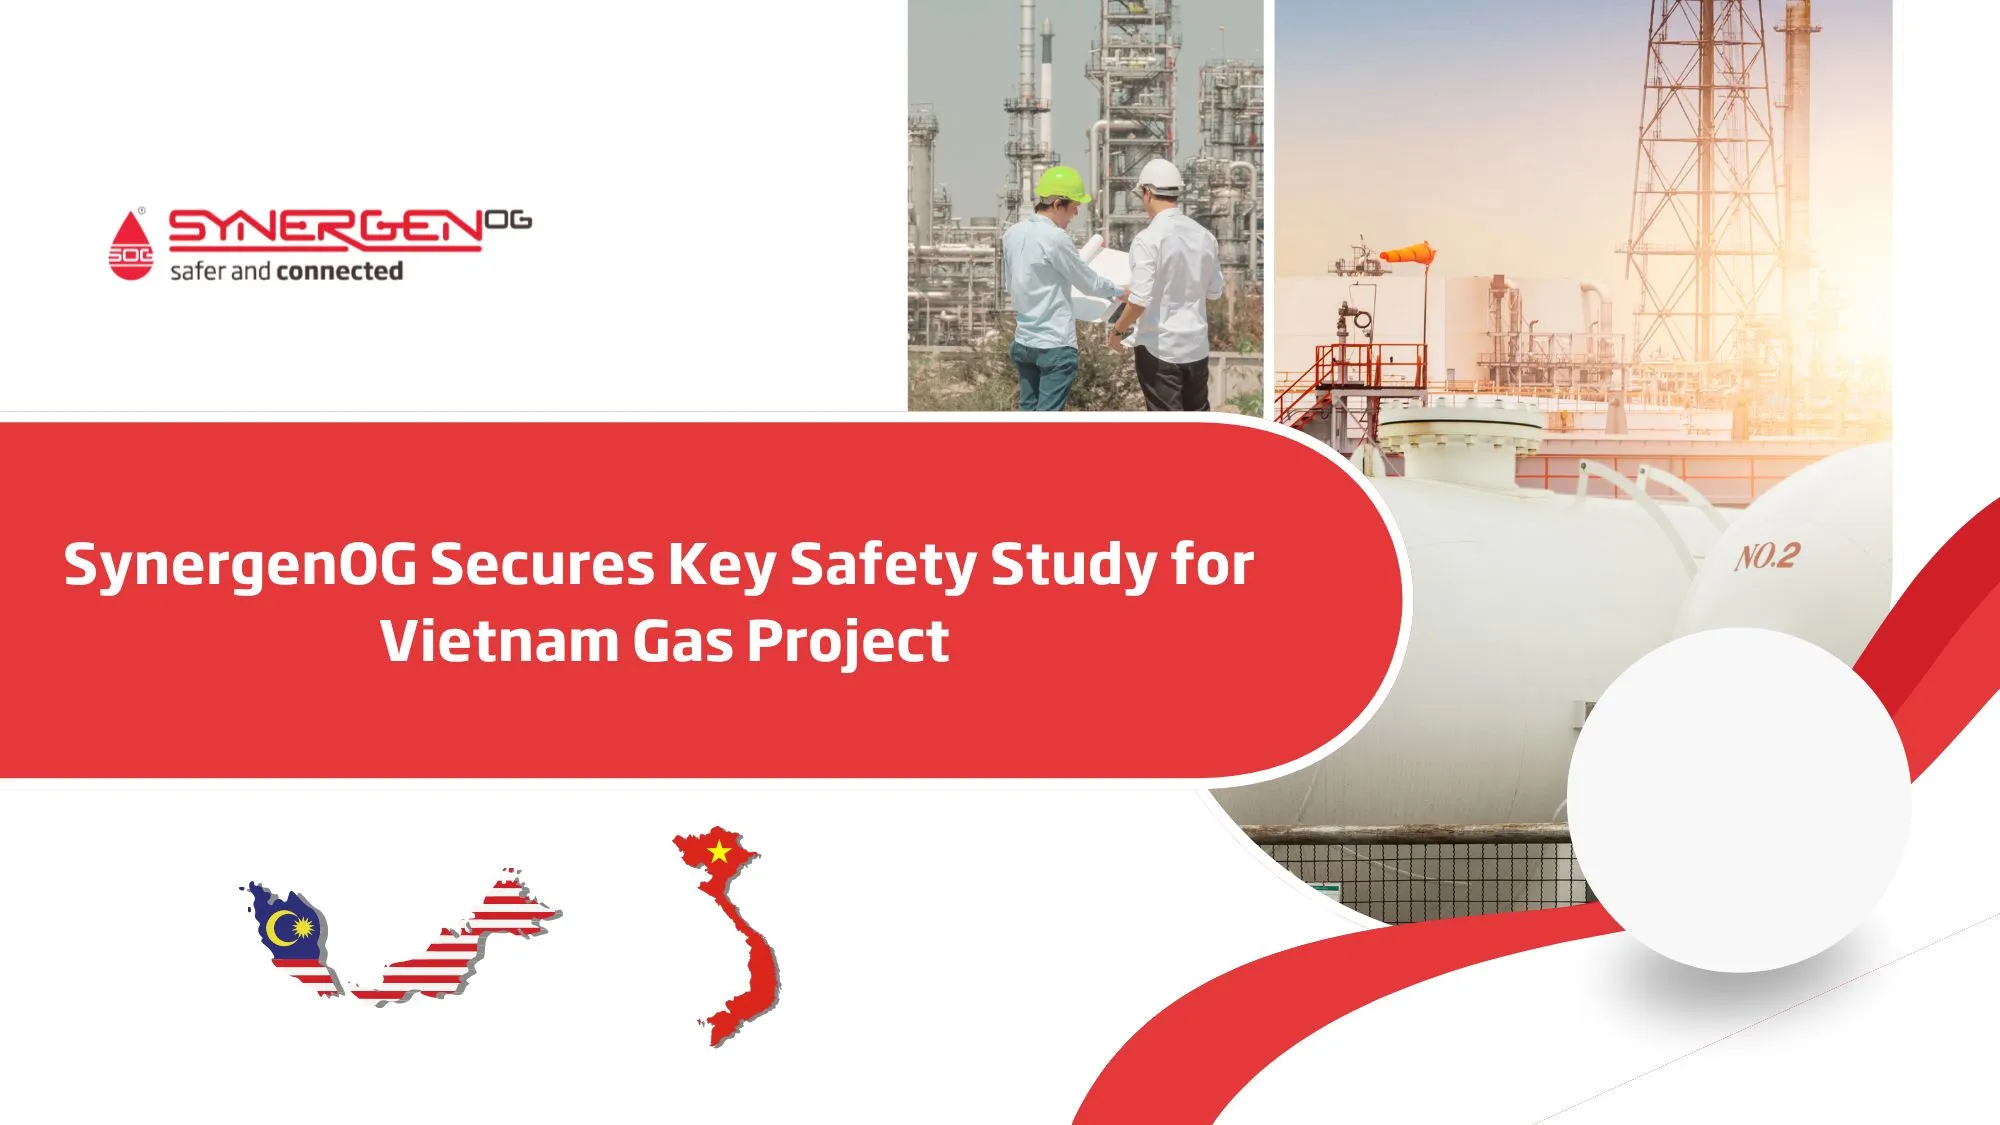 SynergenOG Clinches Safety Studies Contract for Phu Quoc Petroleum Operating Company's Block B Gas Project